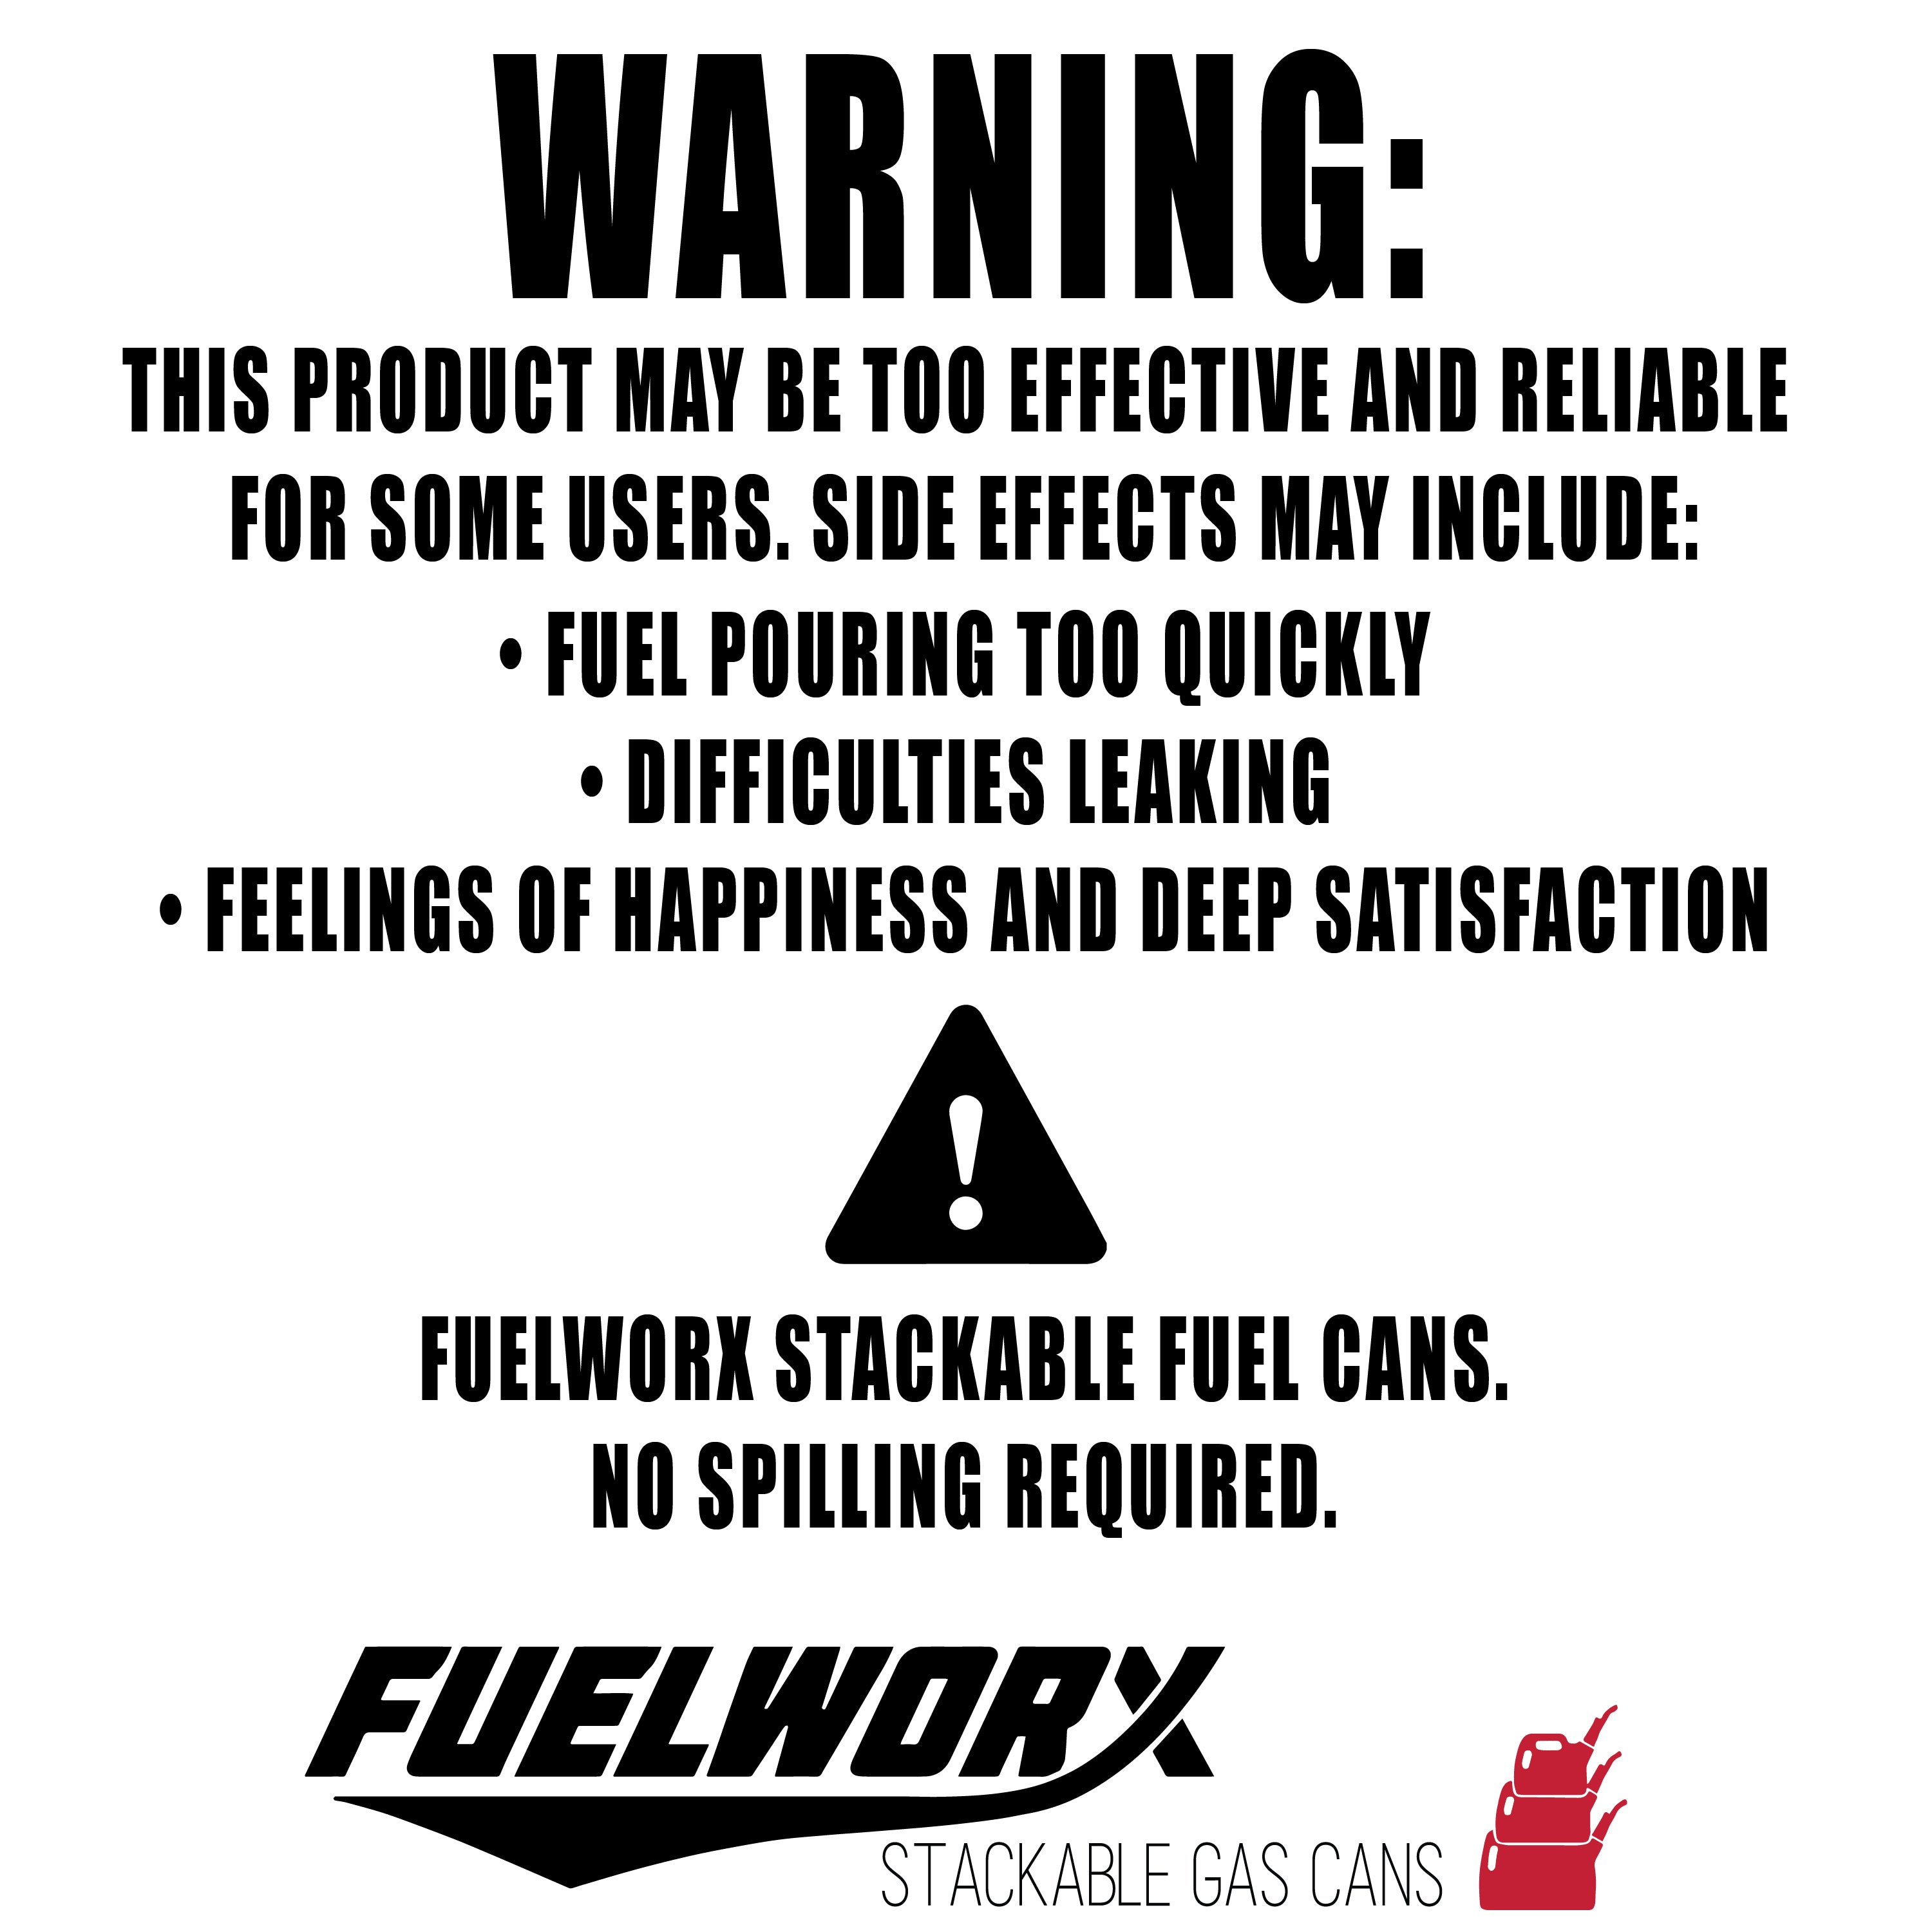 Fuelworx-Yellow-5-Gallon-Stackable-Fast-Pour-Diesel-Fuel-Cans-CARB-Compliant-Made-in-The-USA-5-Gallon-Diesel-Cans-3-Pack-image-7